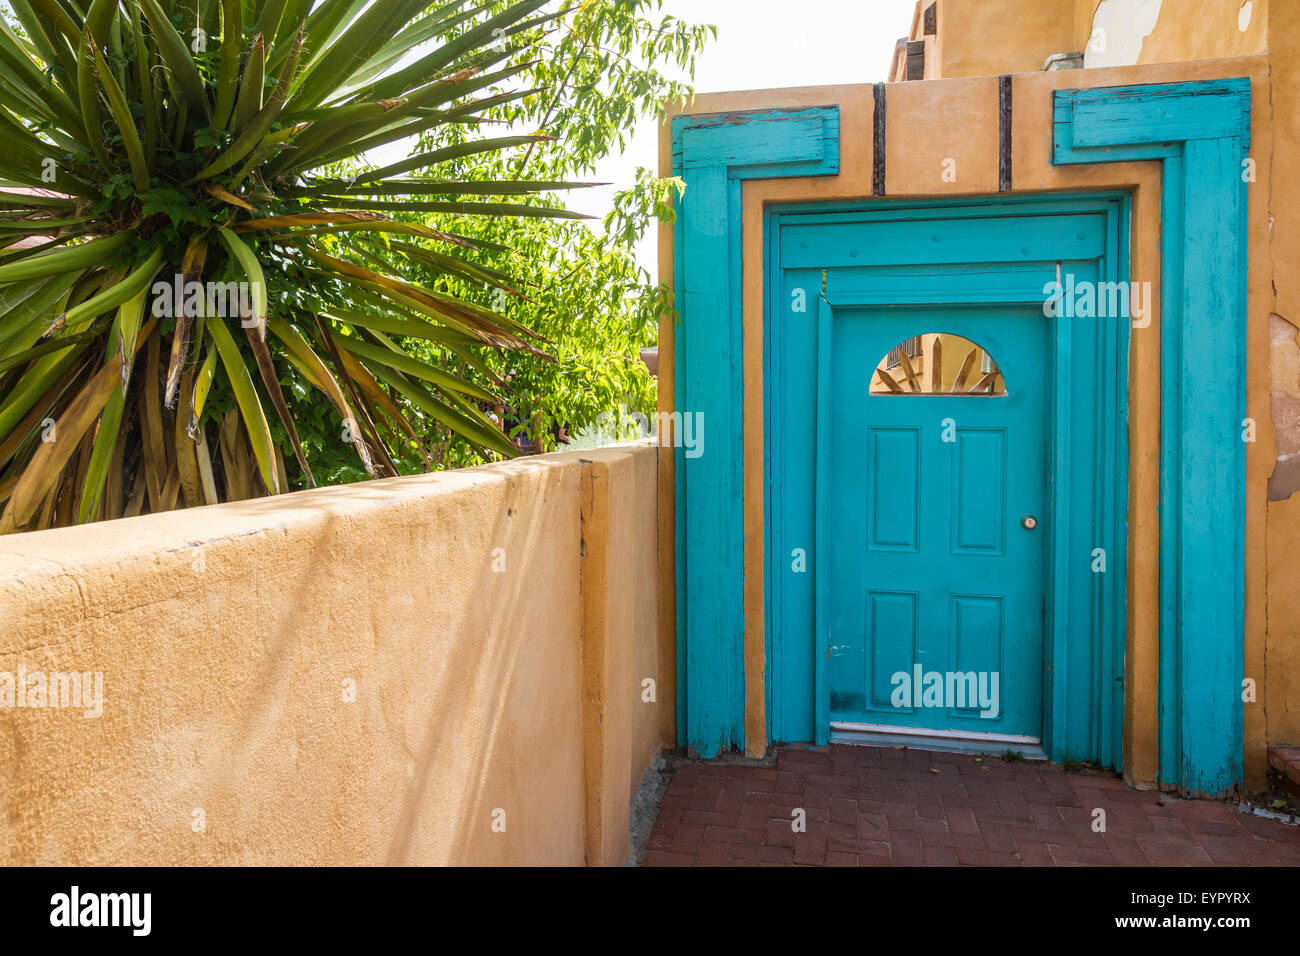 A decorative doorway in Old Town Albuquerque, New Mexico, USA. Stock Photo